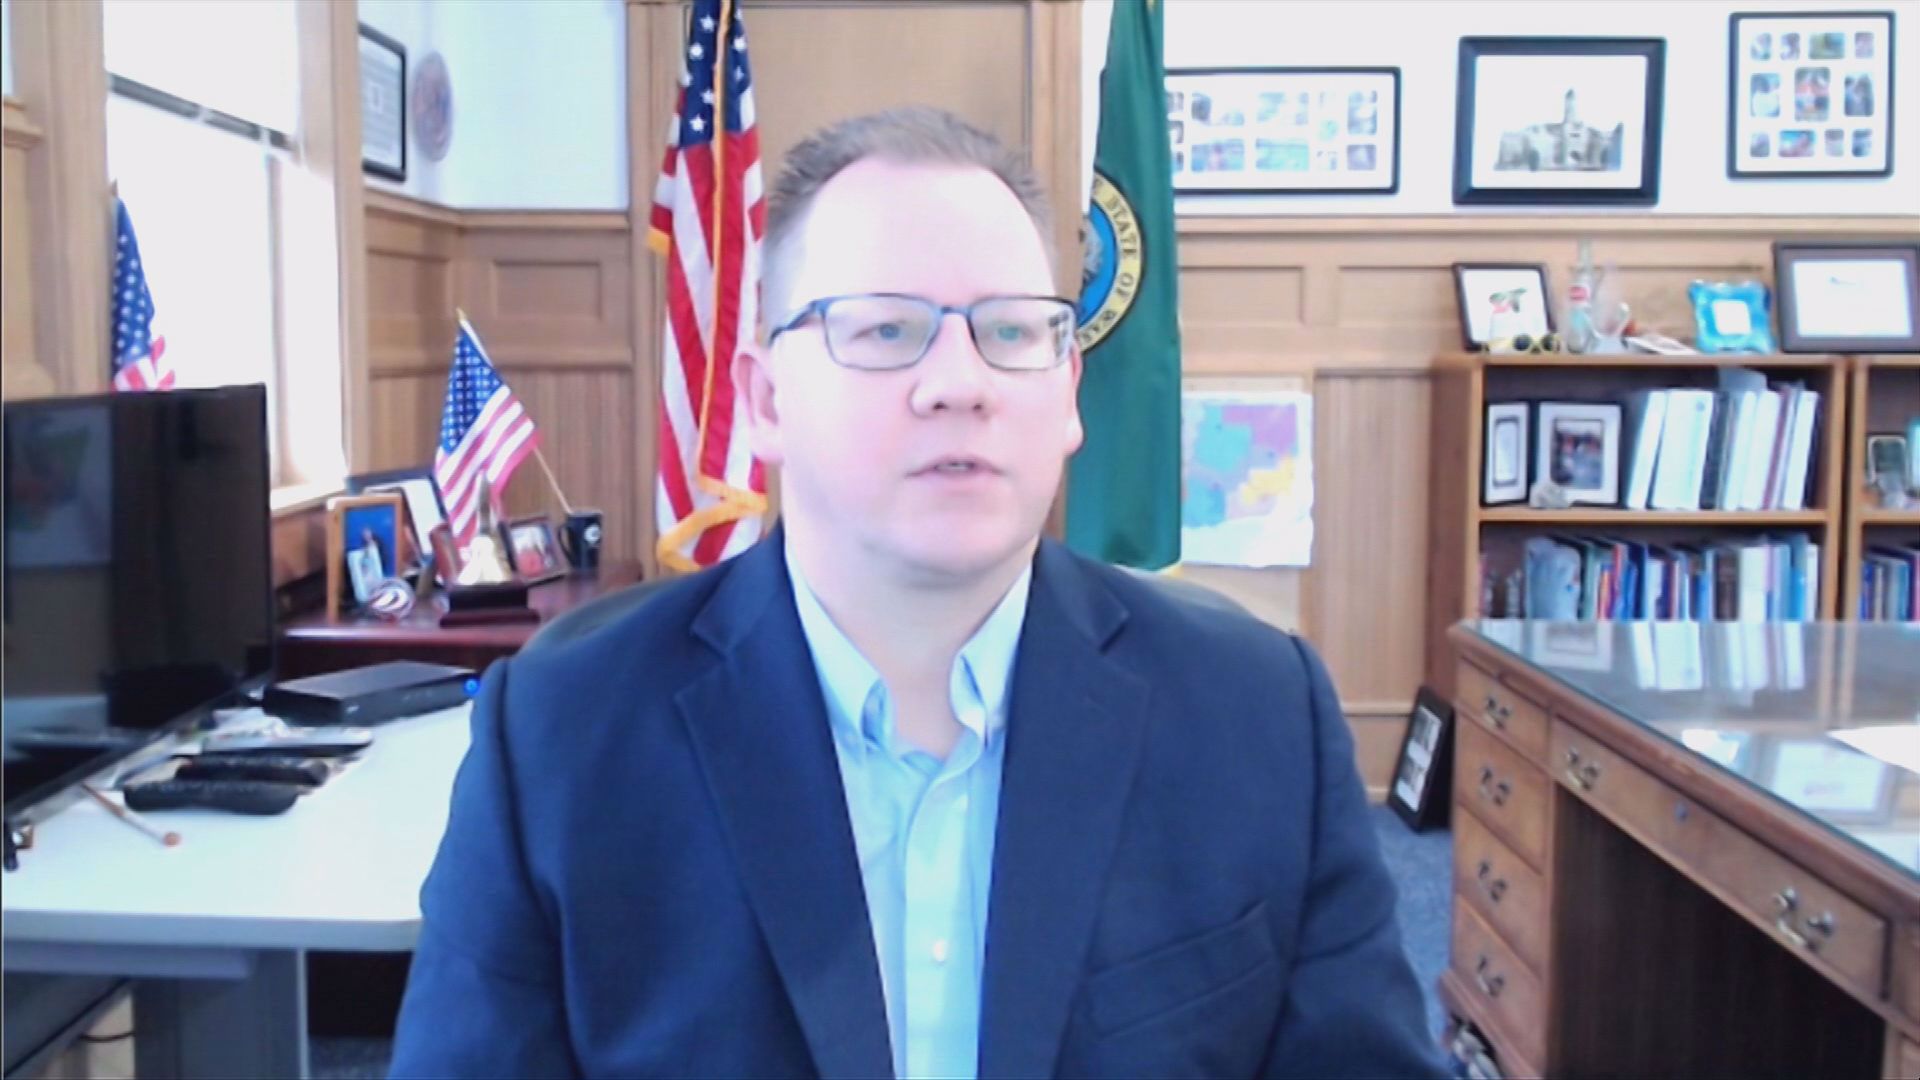 Washington Superintendent of Public Instruction Chris Reykdal said in an interview with KING 5 on Feb. 8 that he would support making masks optional in schools.